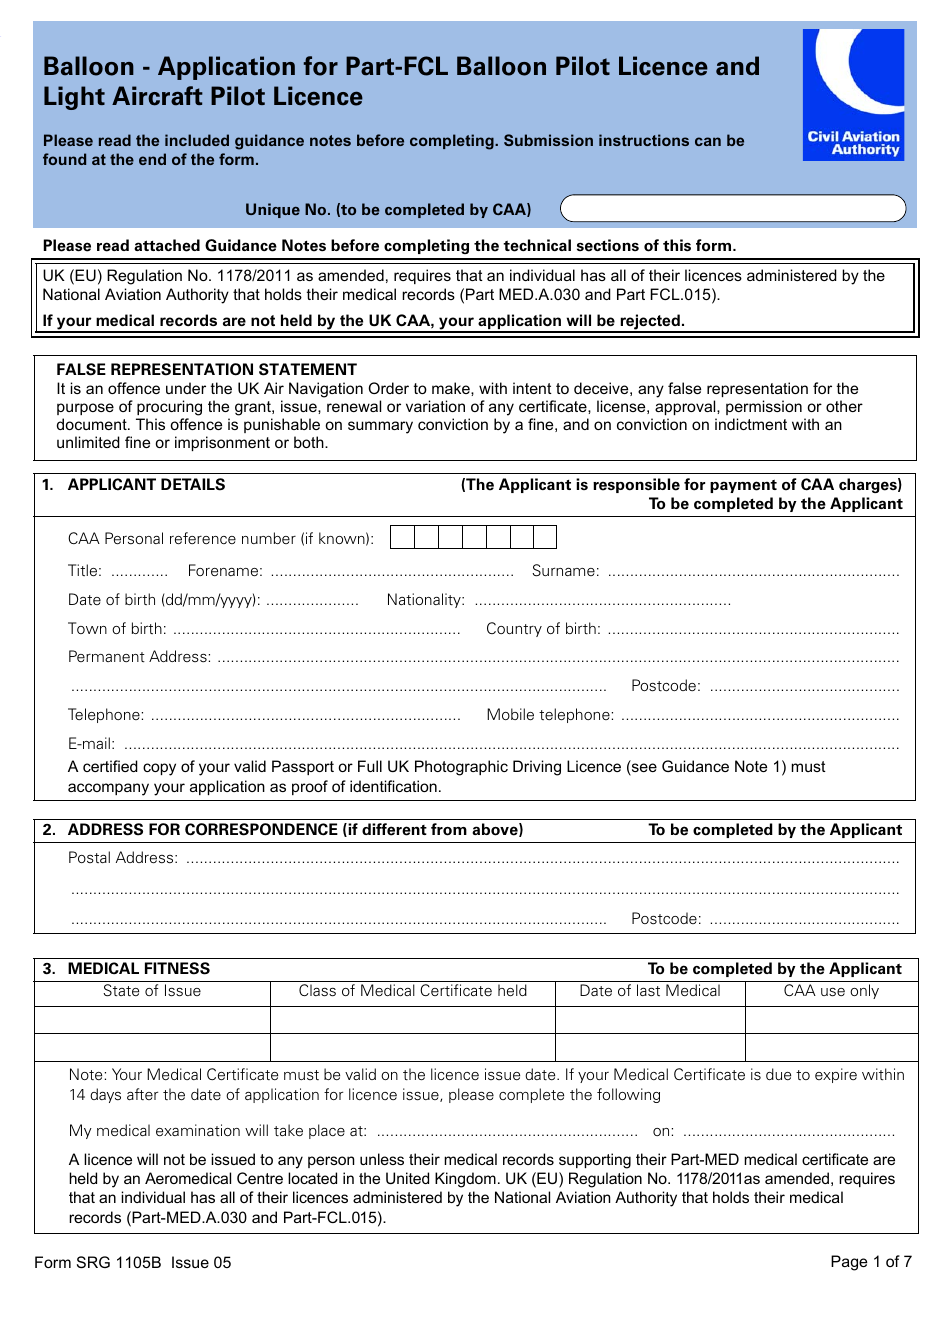 Form SRG1105B Balloon - Application for Part-Fcl Balloon Pilot Licence and Light Aircraft Pilot Licence - United Kingdom, Page 1